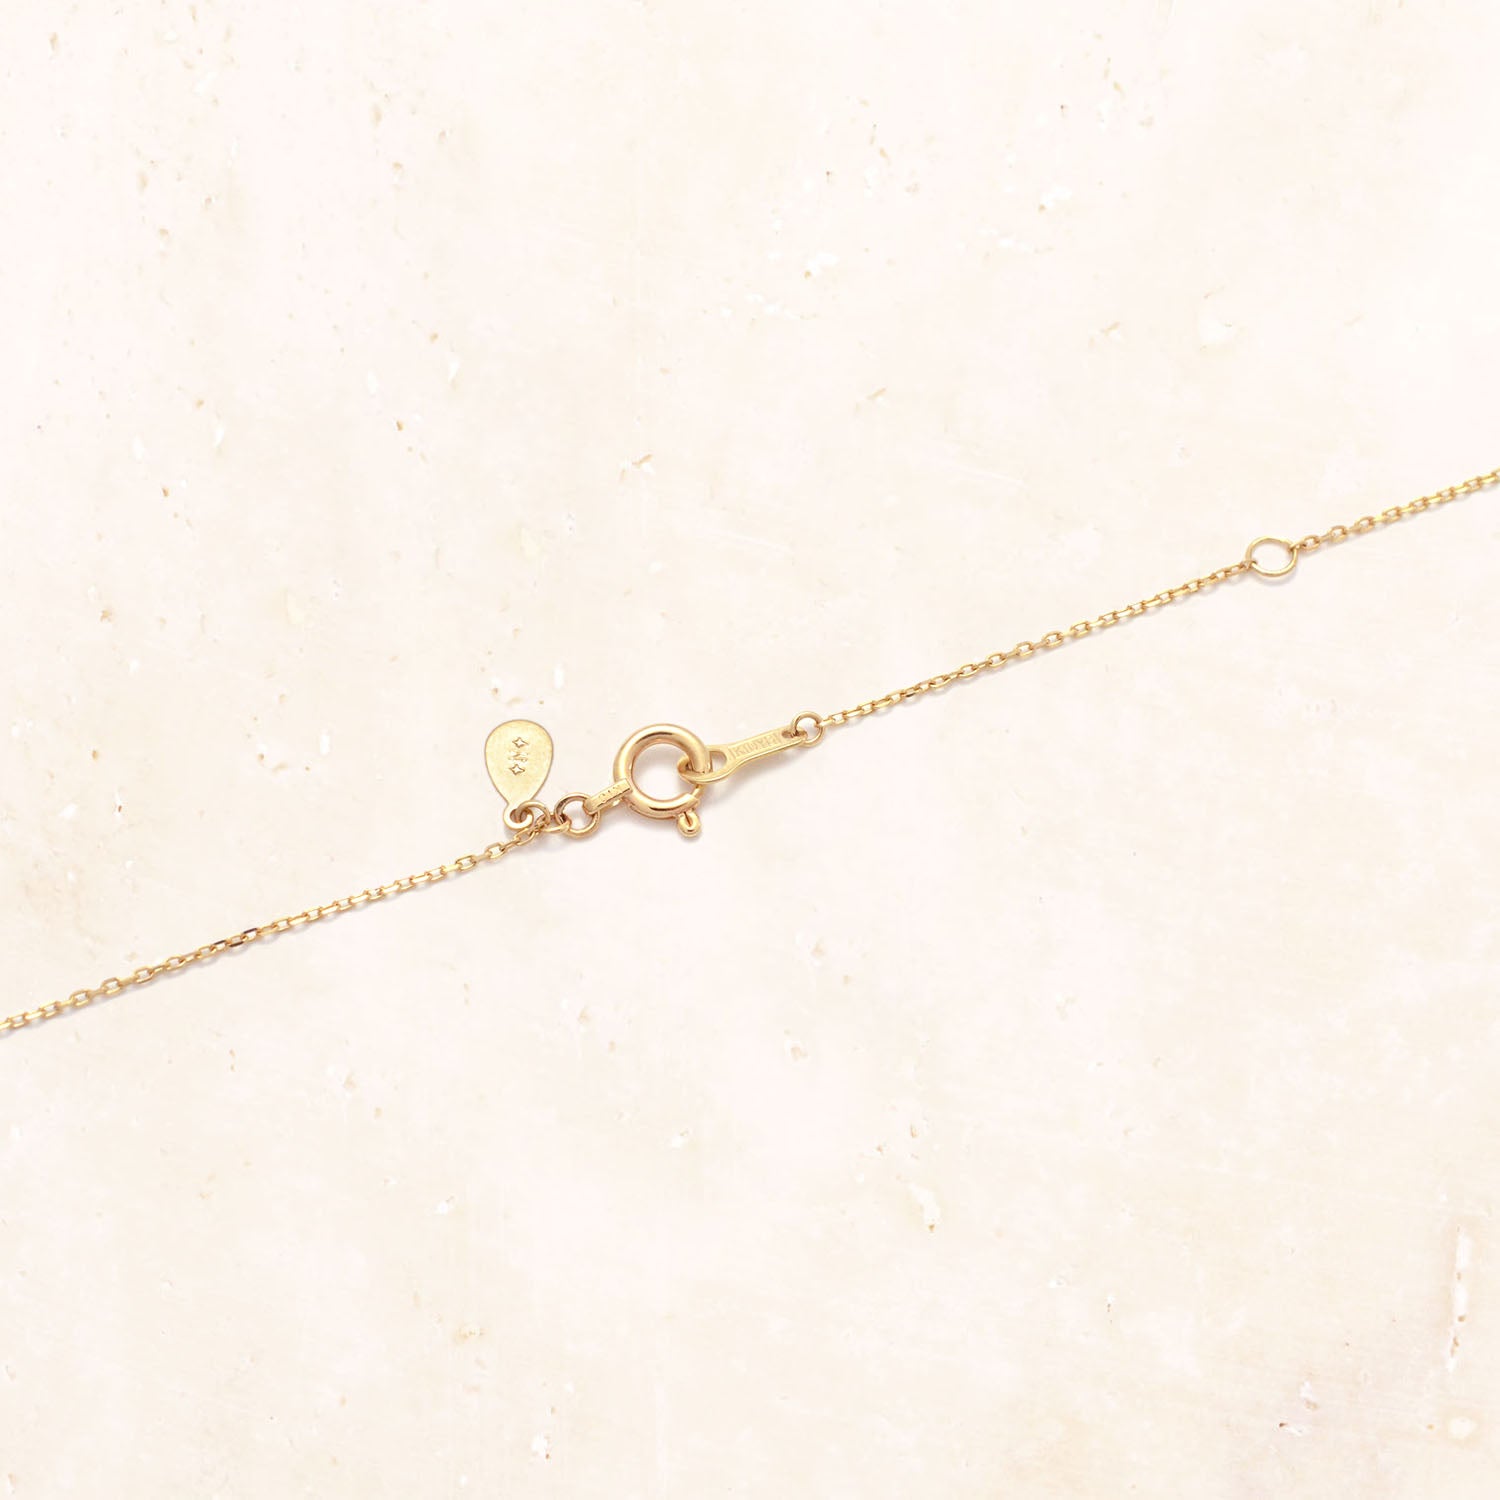 10K Gold Double Comet Candy Necklace (Ruby)